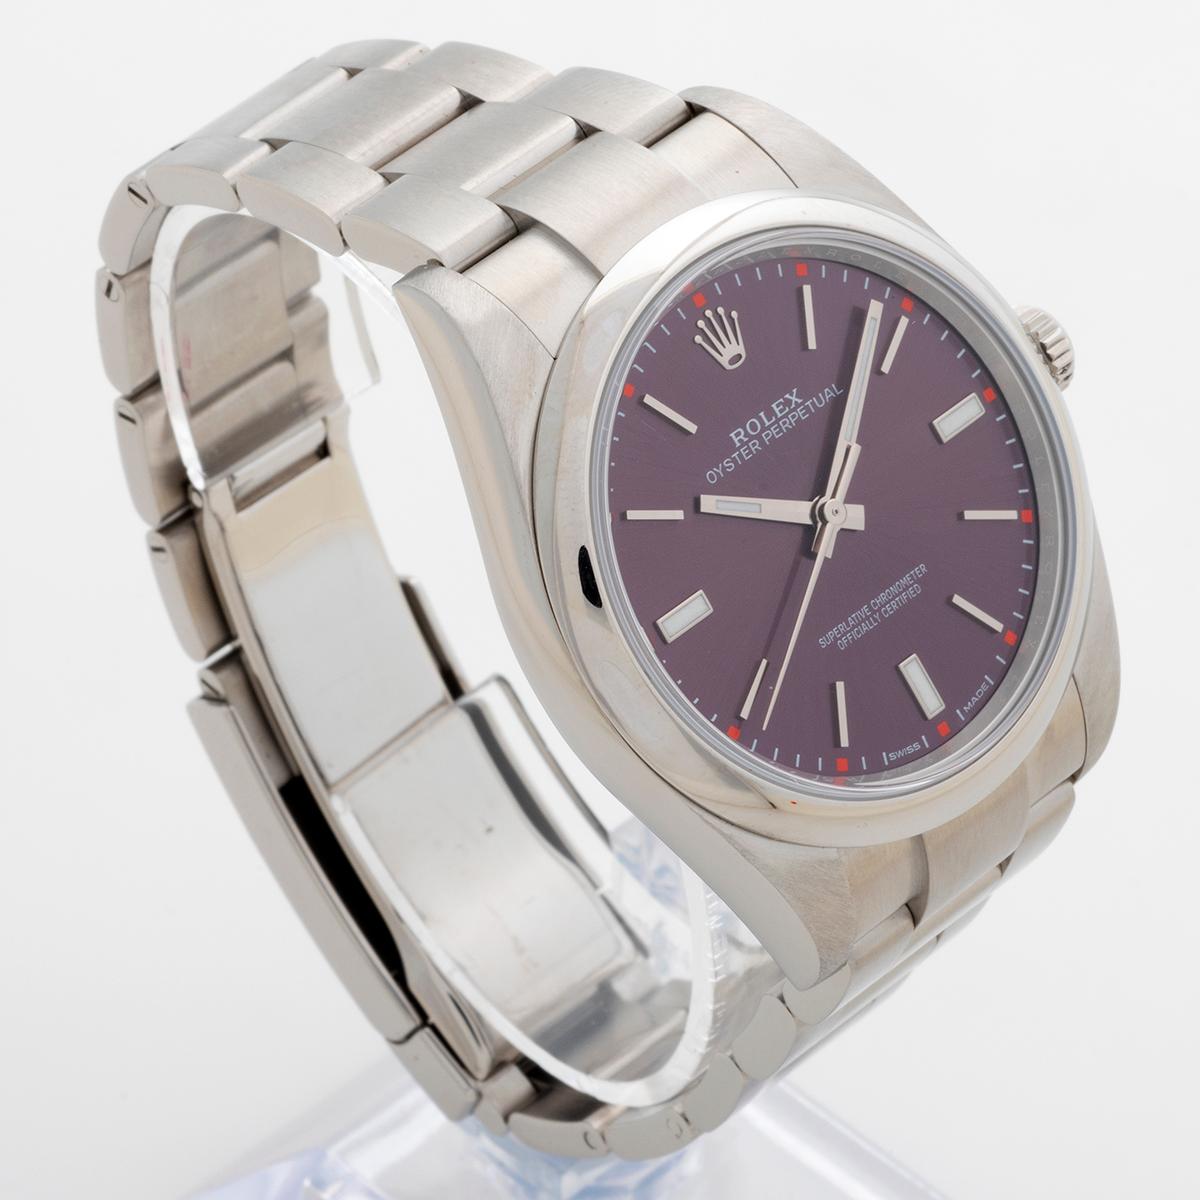 This discontinued 39mm Rolex Oyster Perpetual, reference 114300, was launched in 2015 with unusual and attractive new dial variants, the most vibrant and desirable of which is the 